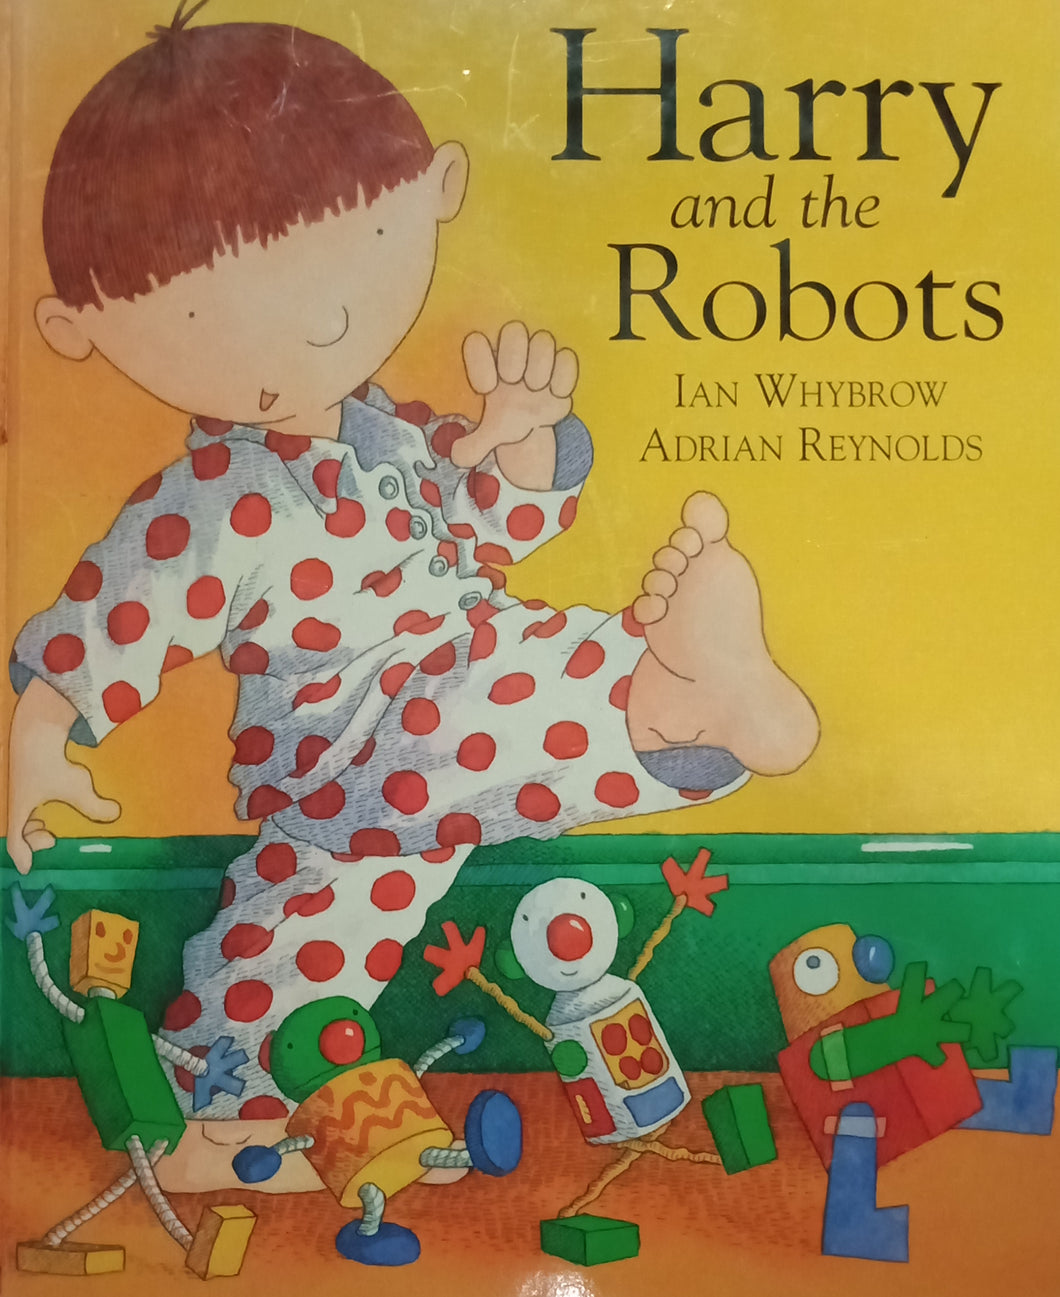 Harry And The Robots by Ian Whybrow